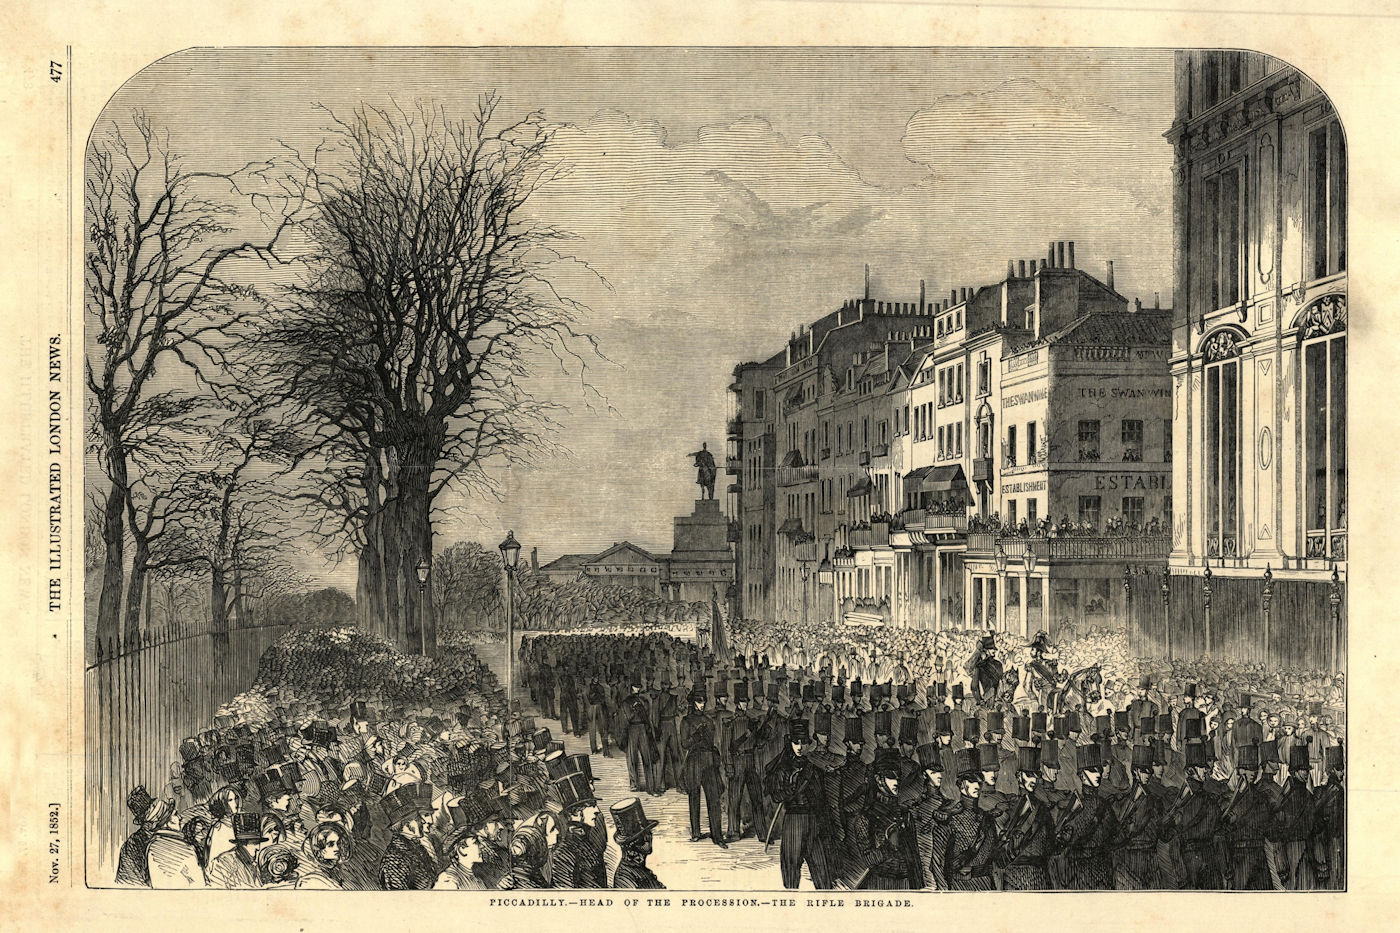 Piccadilly - head of the procession - the Rifle Brigade. London 1852 old print